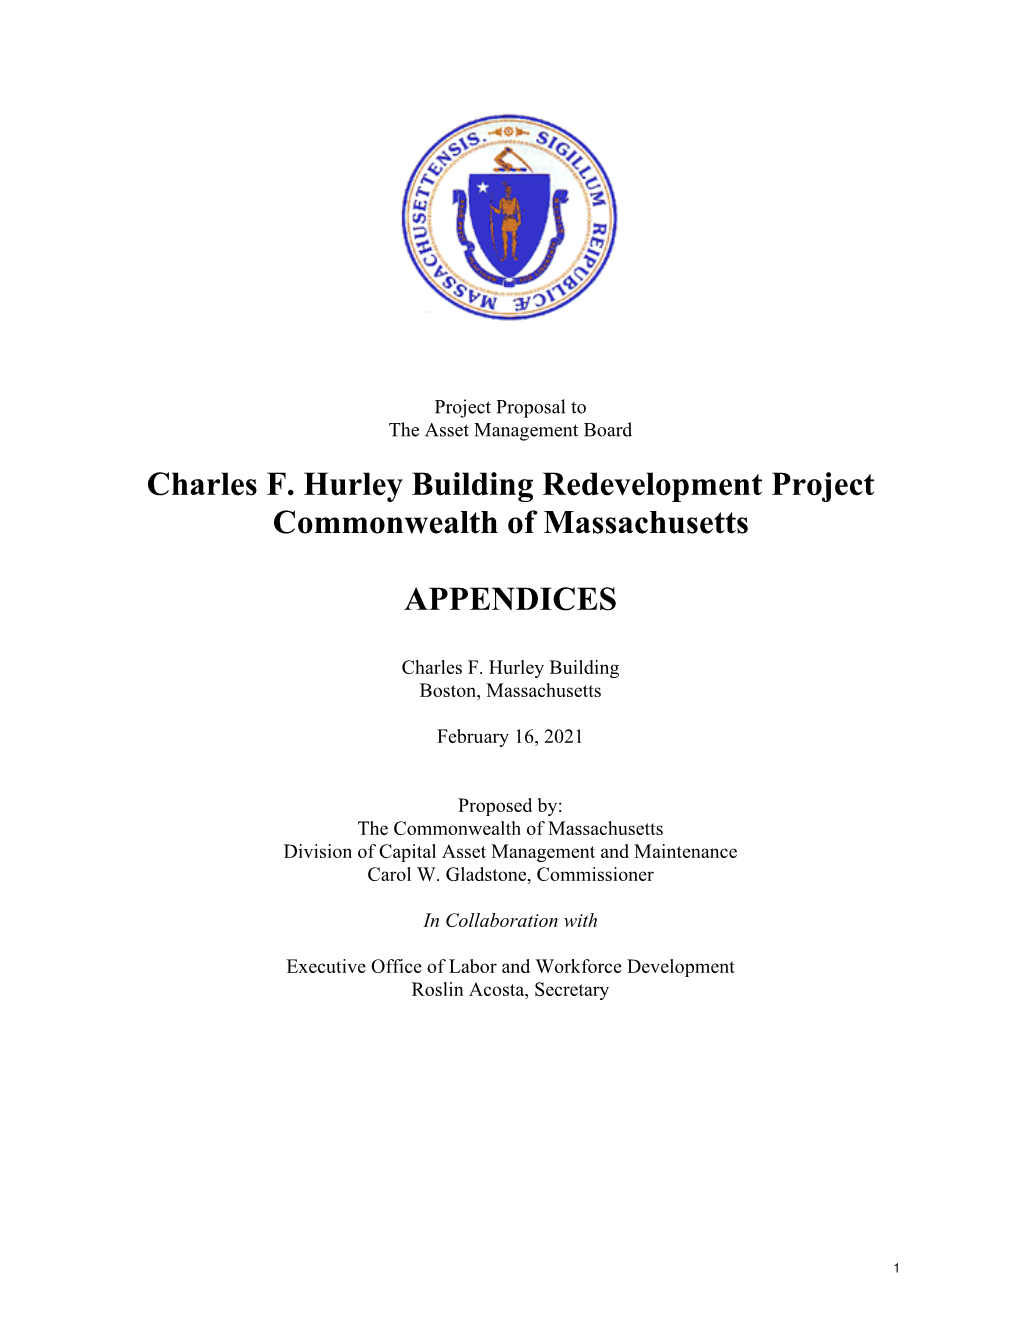 Charles F. Hurley Building Redevelopment Project Commonwealth of Massachusetts